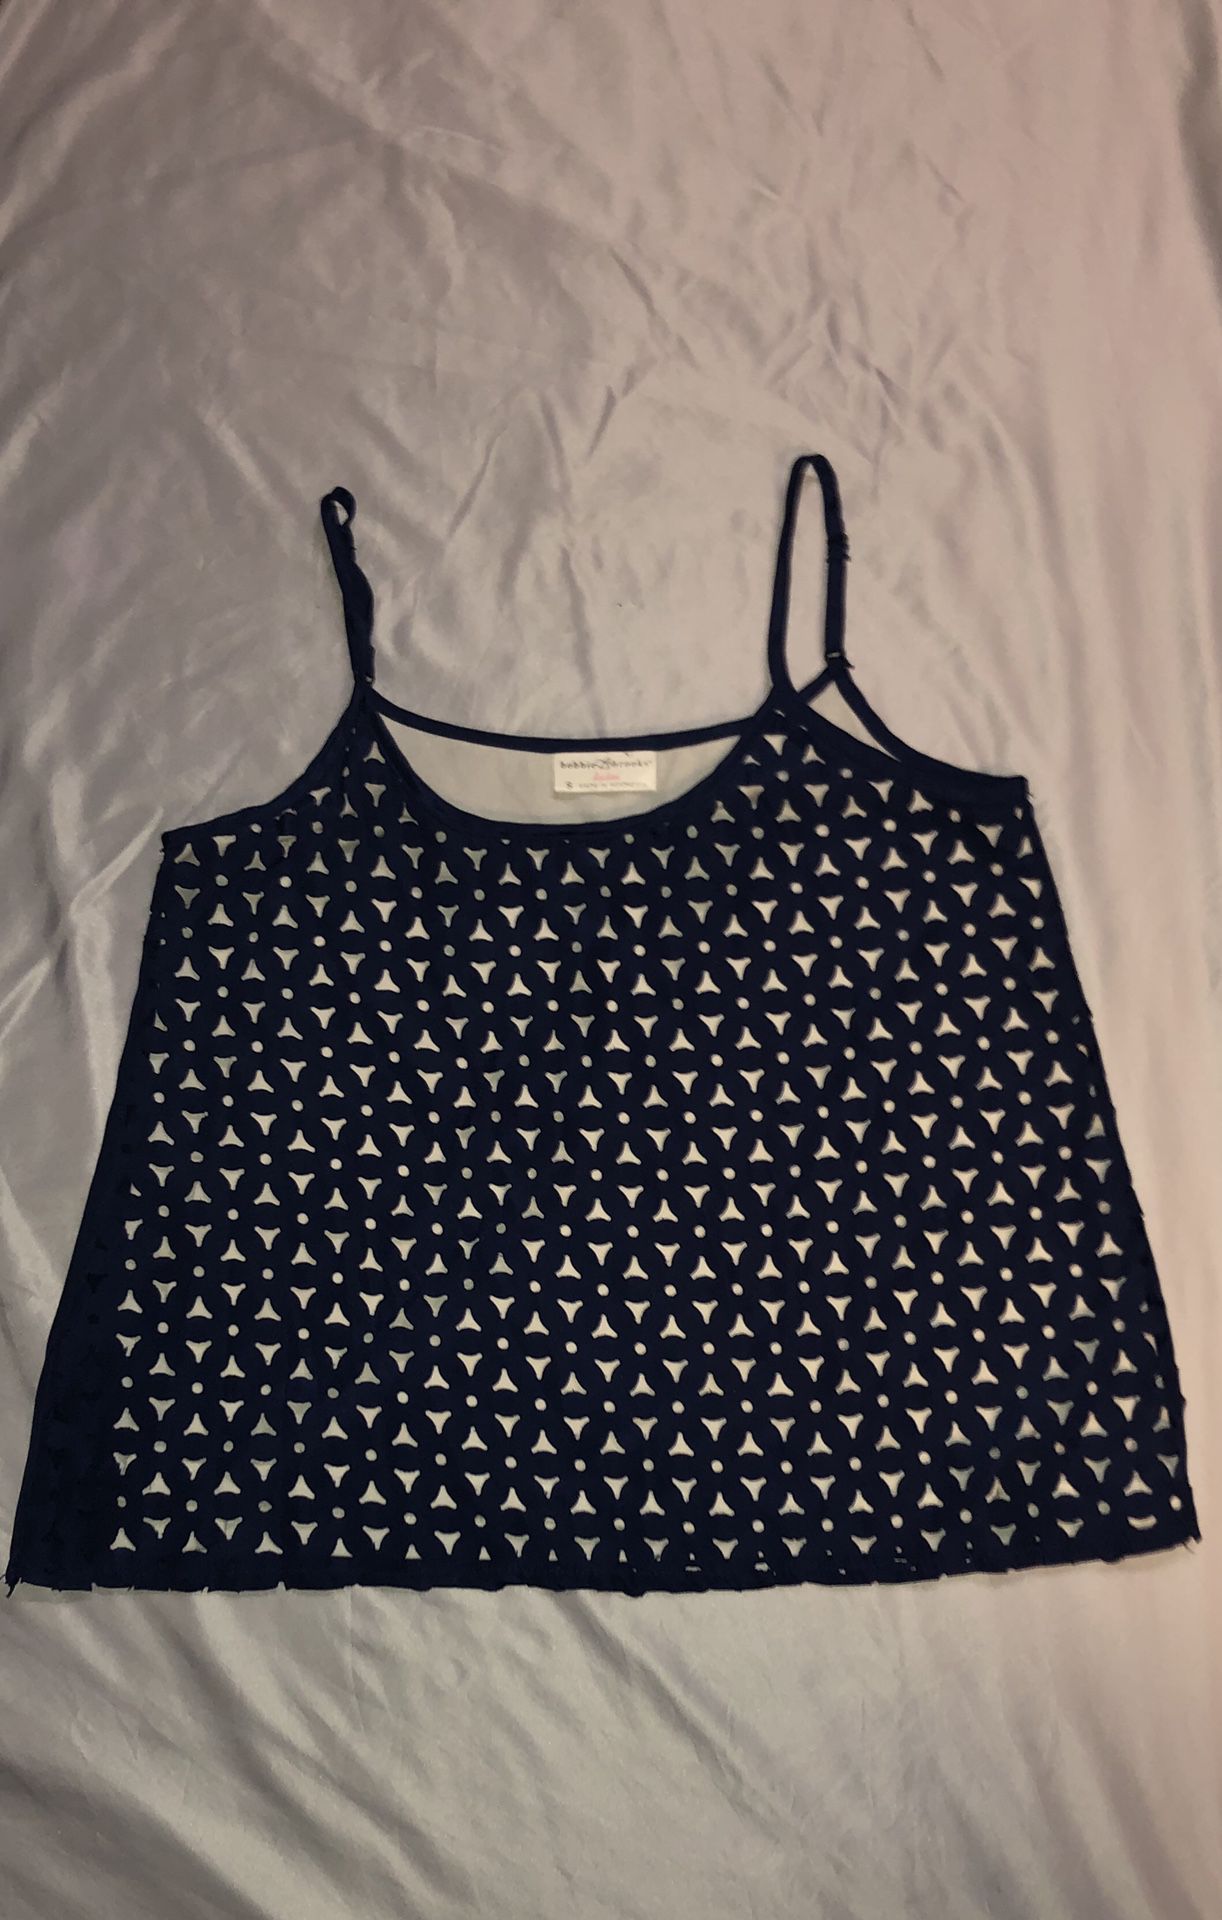 Size small (runs bigger) navy and beige tank top